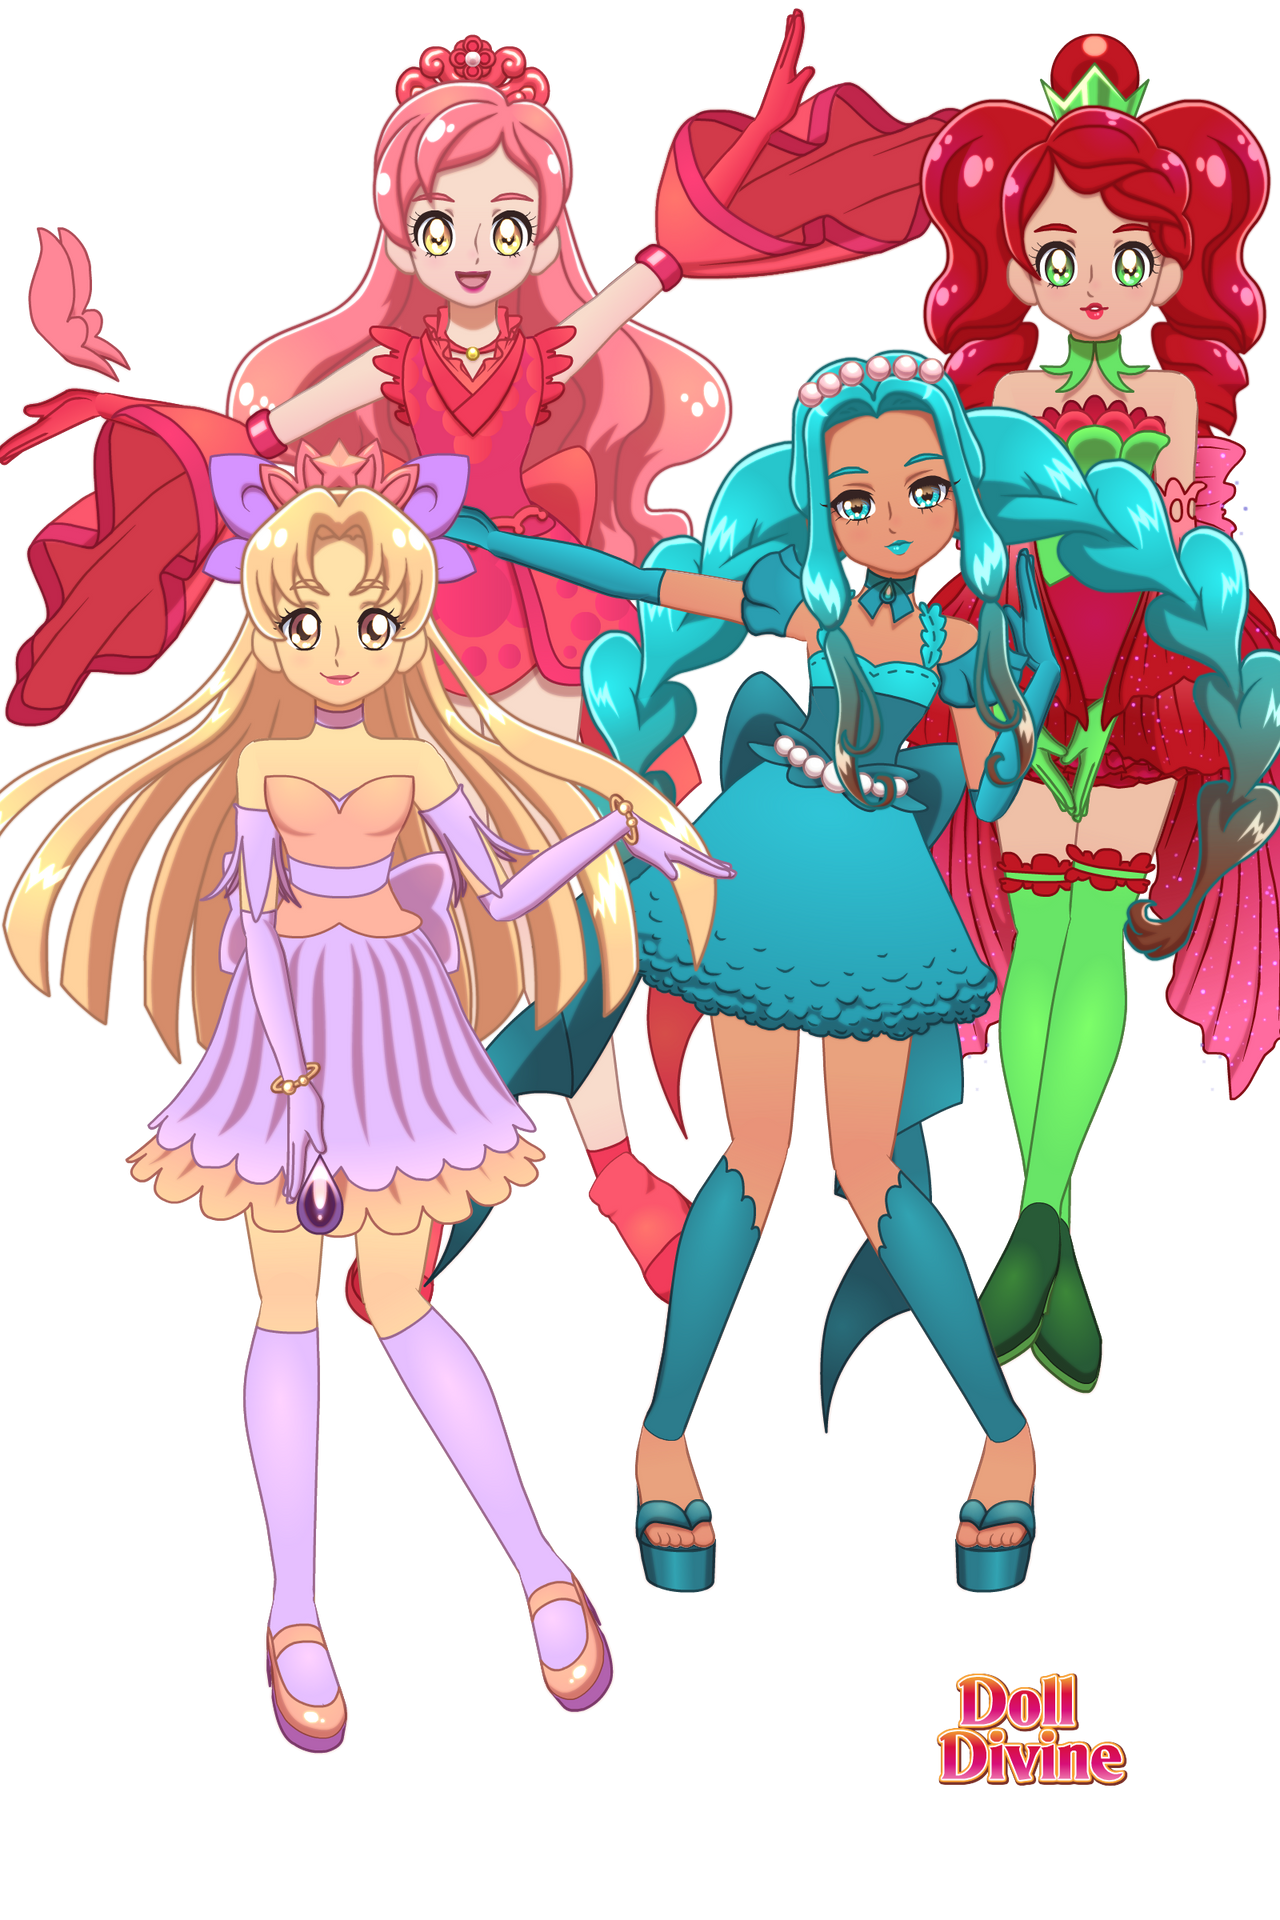 Precure All Stars F  Butterfly Team Transformation Fanmade 